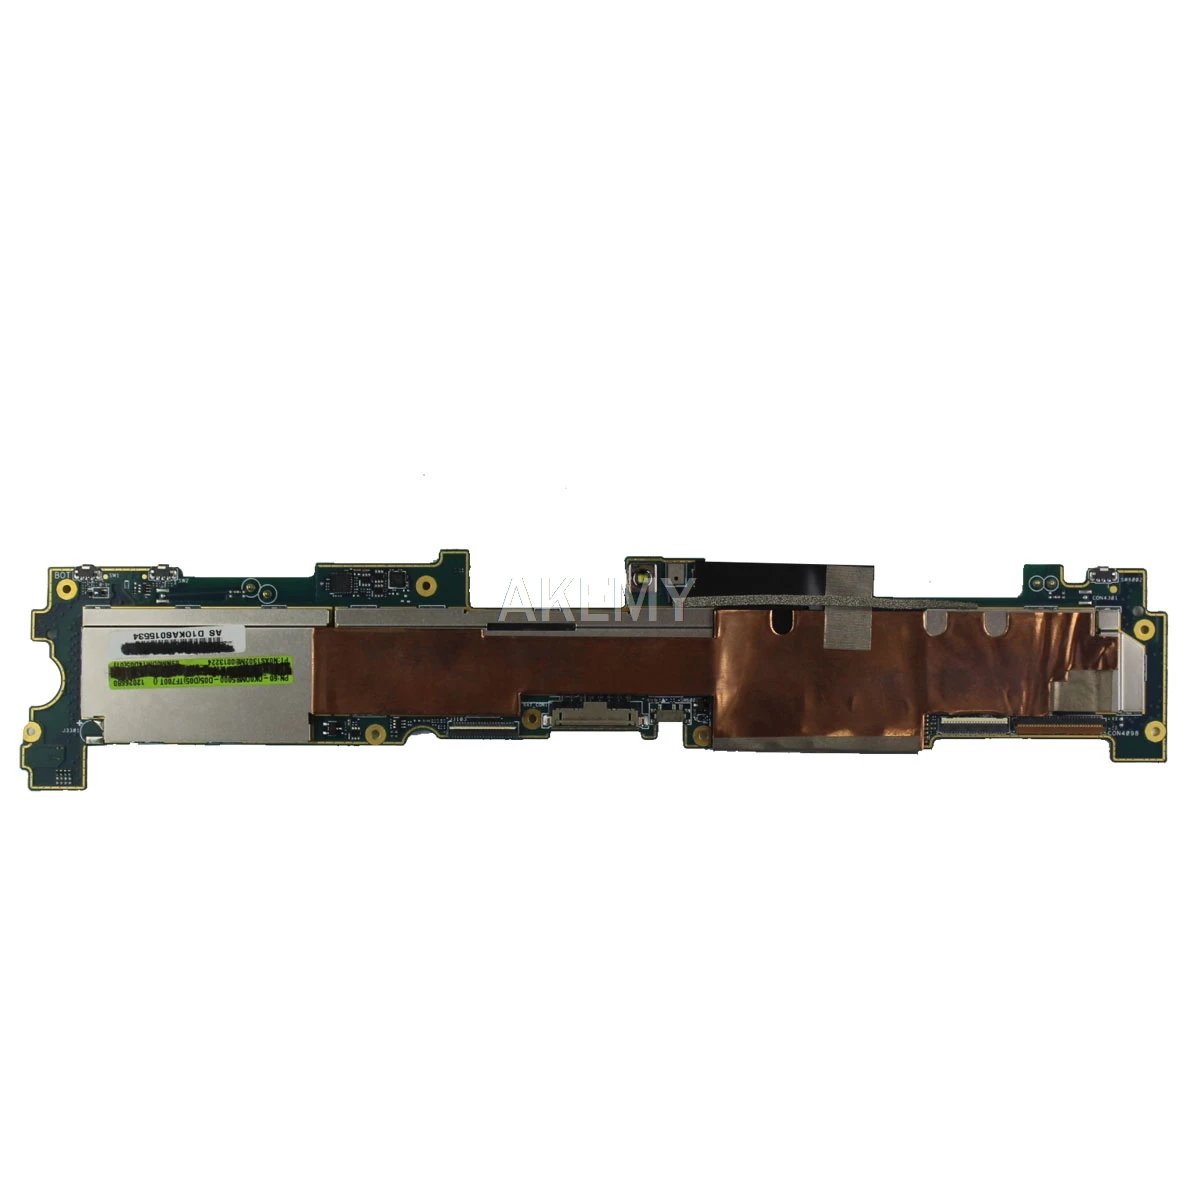 

New! original For ASUS Pad Infinity TF700 TF700T Tablets motherboard Mainboard logic board W/ 32G 64G SSD 1G-RAM